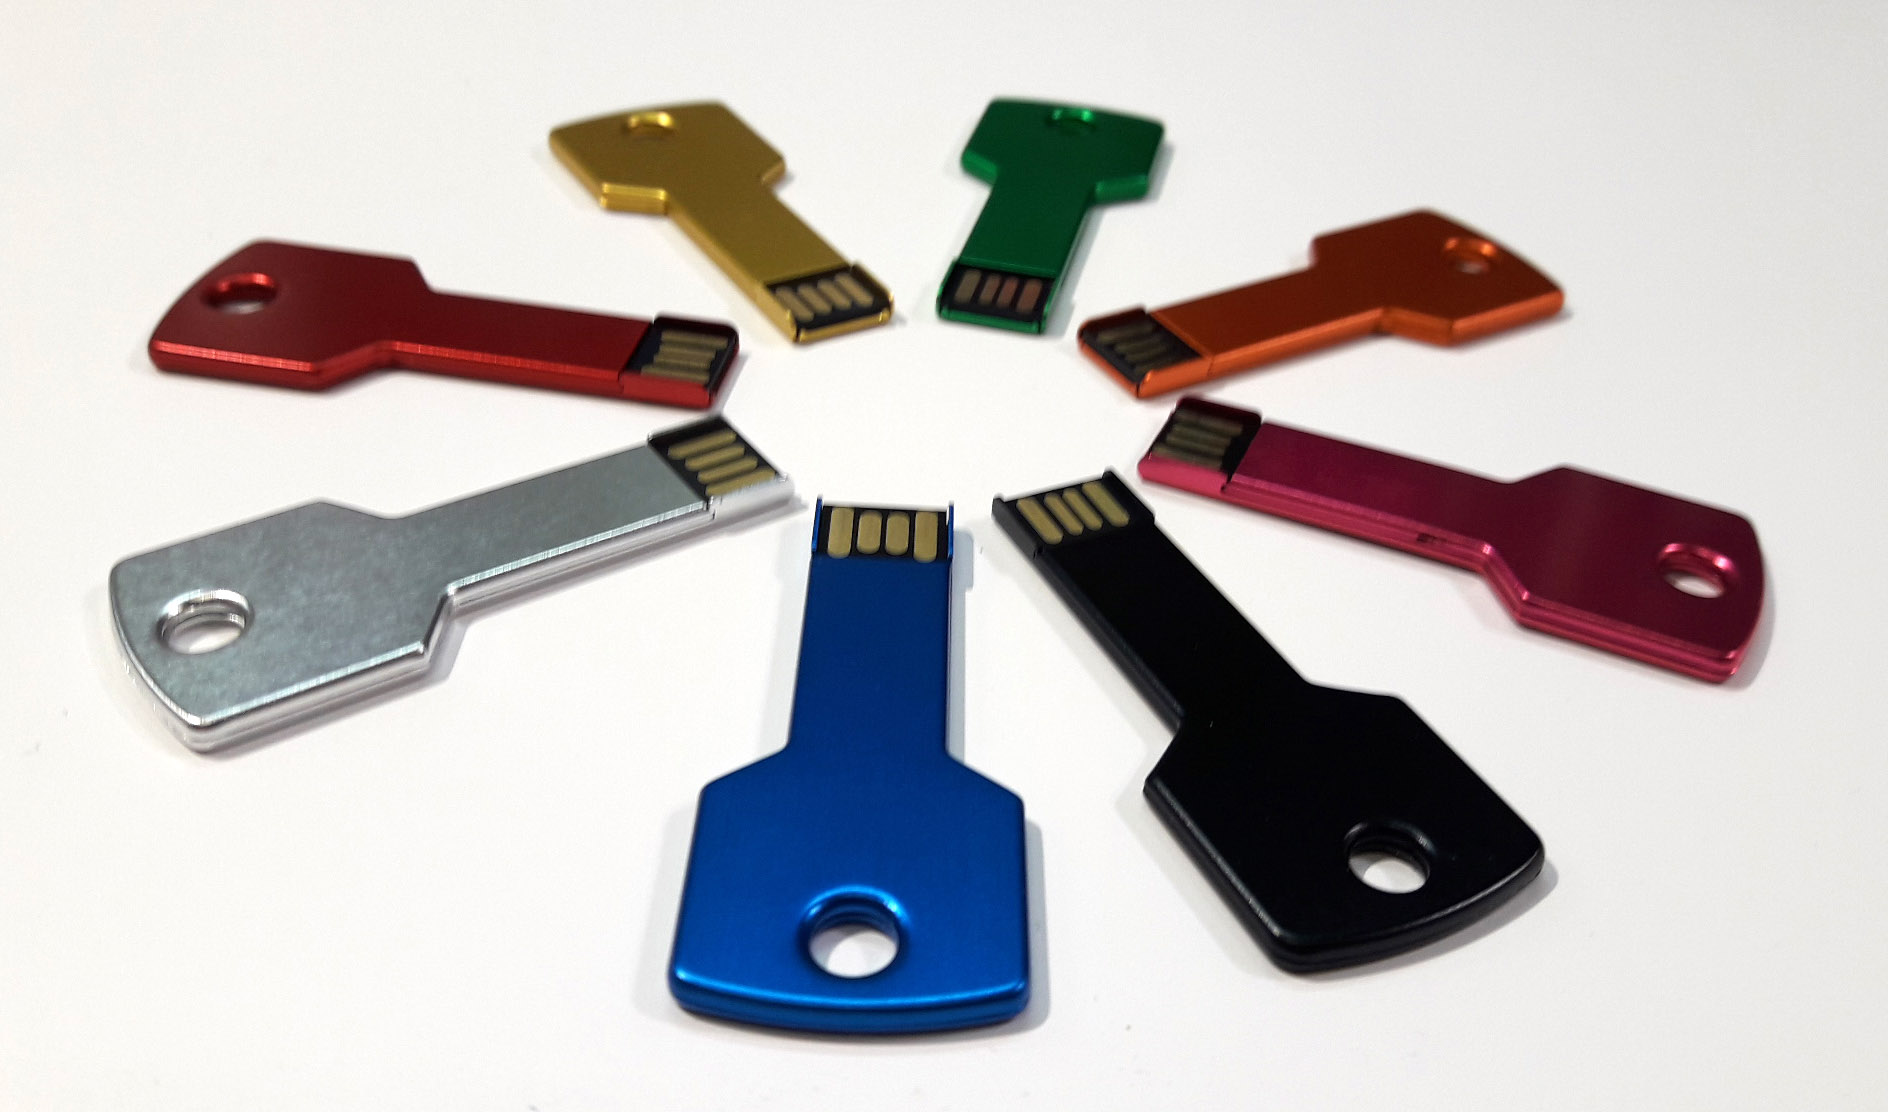 Pack 100 USB LLAVE